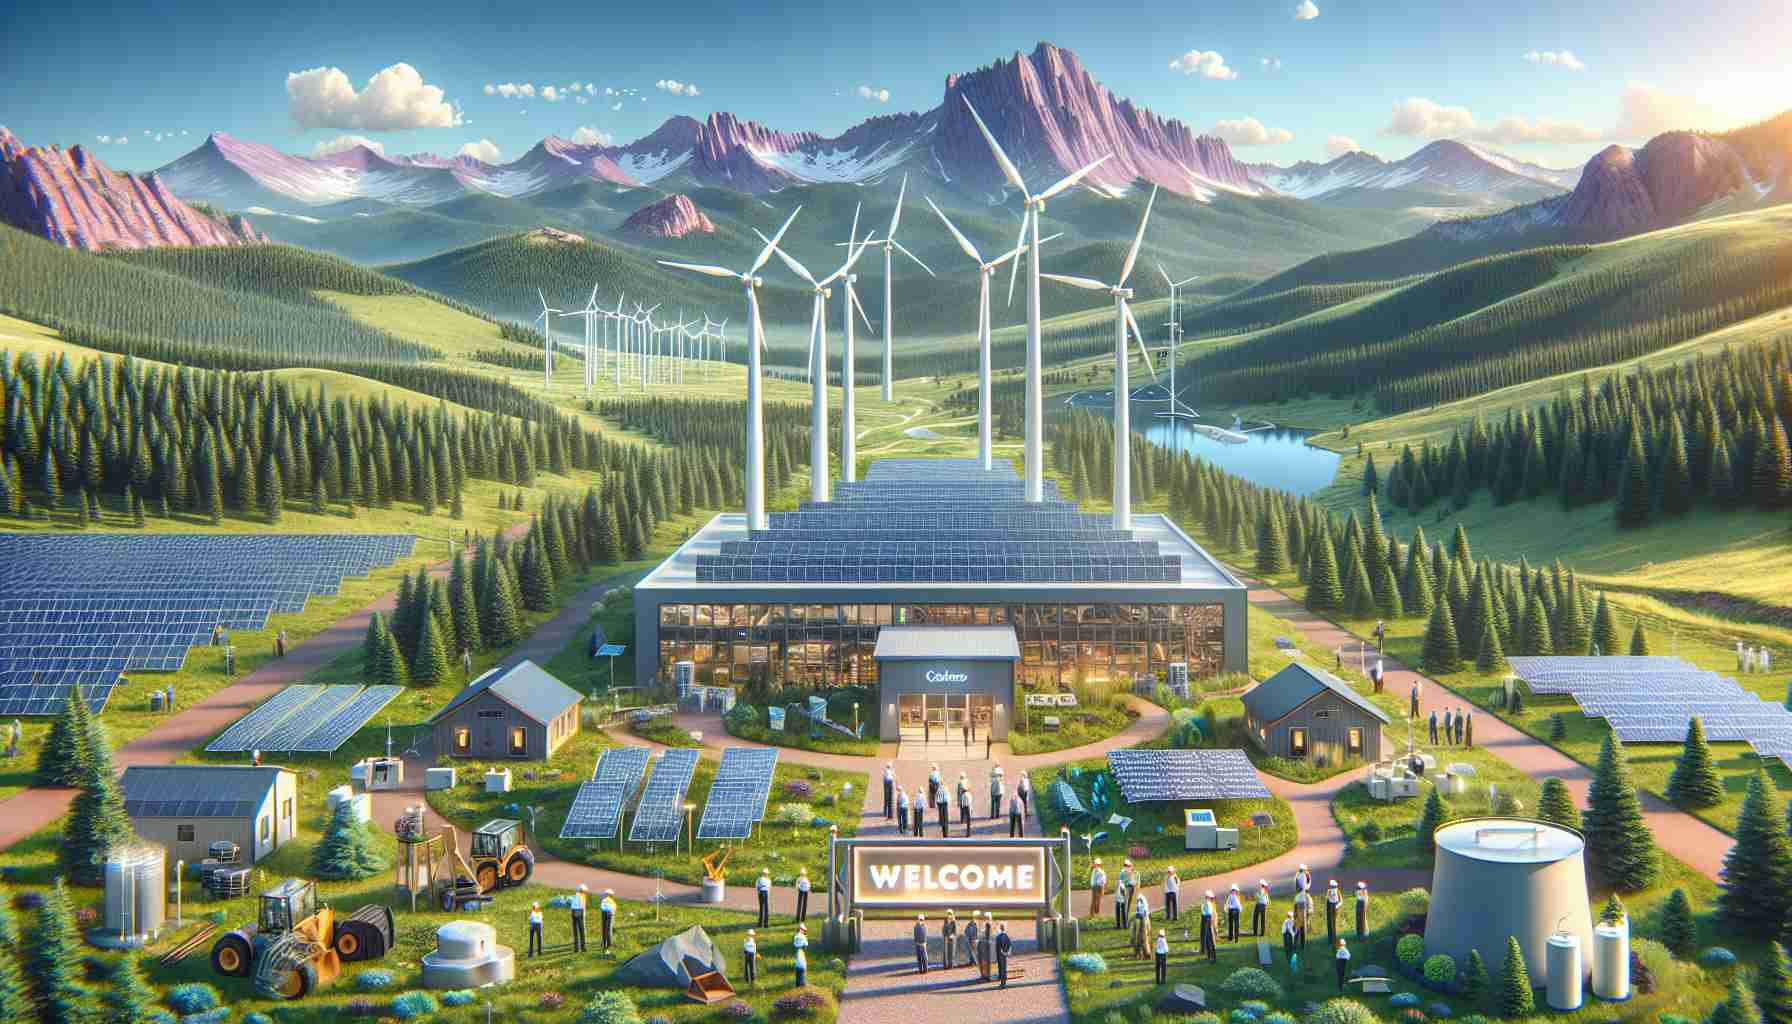 Generate a realistic, high-definition image illustrating the concept of innovative sustainable energy project being welcomed in Colorado. This scene features modern, eco-friendly technologies such as wind turbines and solar panels nestled within the picturesque landscape of Colorado encompassing purple Rocky Mountains, dense green forests, and a wide-open blue sky. The centerpiece of this scene is a sign displaying 'Welcome' along with symbolic graphics indicating the fusion of environmental sustainability and technological innovation. Add details such as a few people, with diverse gender and descent like Caucasian males, Hispanic females etc., wearing safety gear, inspecting and initiating the project, thus indicating the active participation of the community.